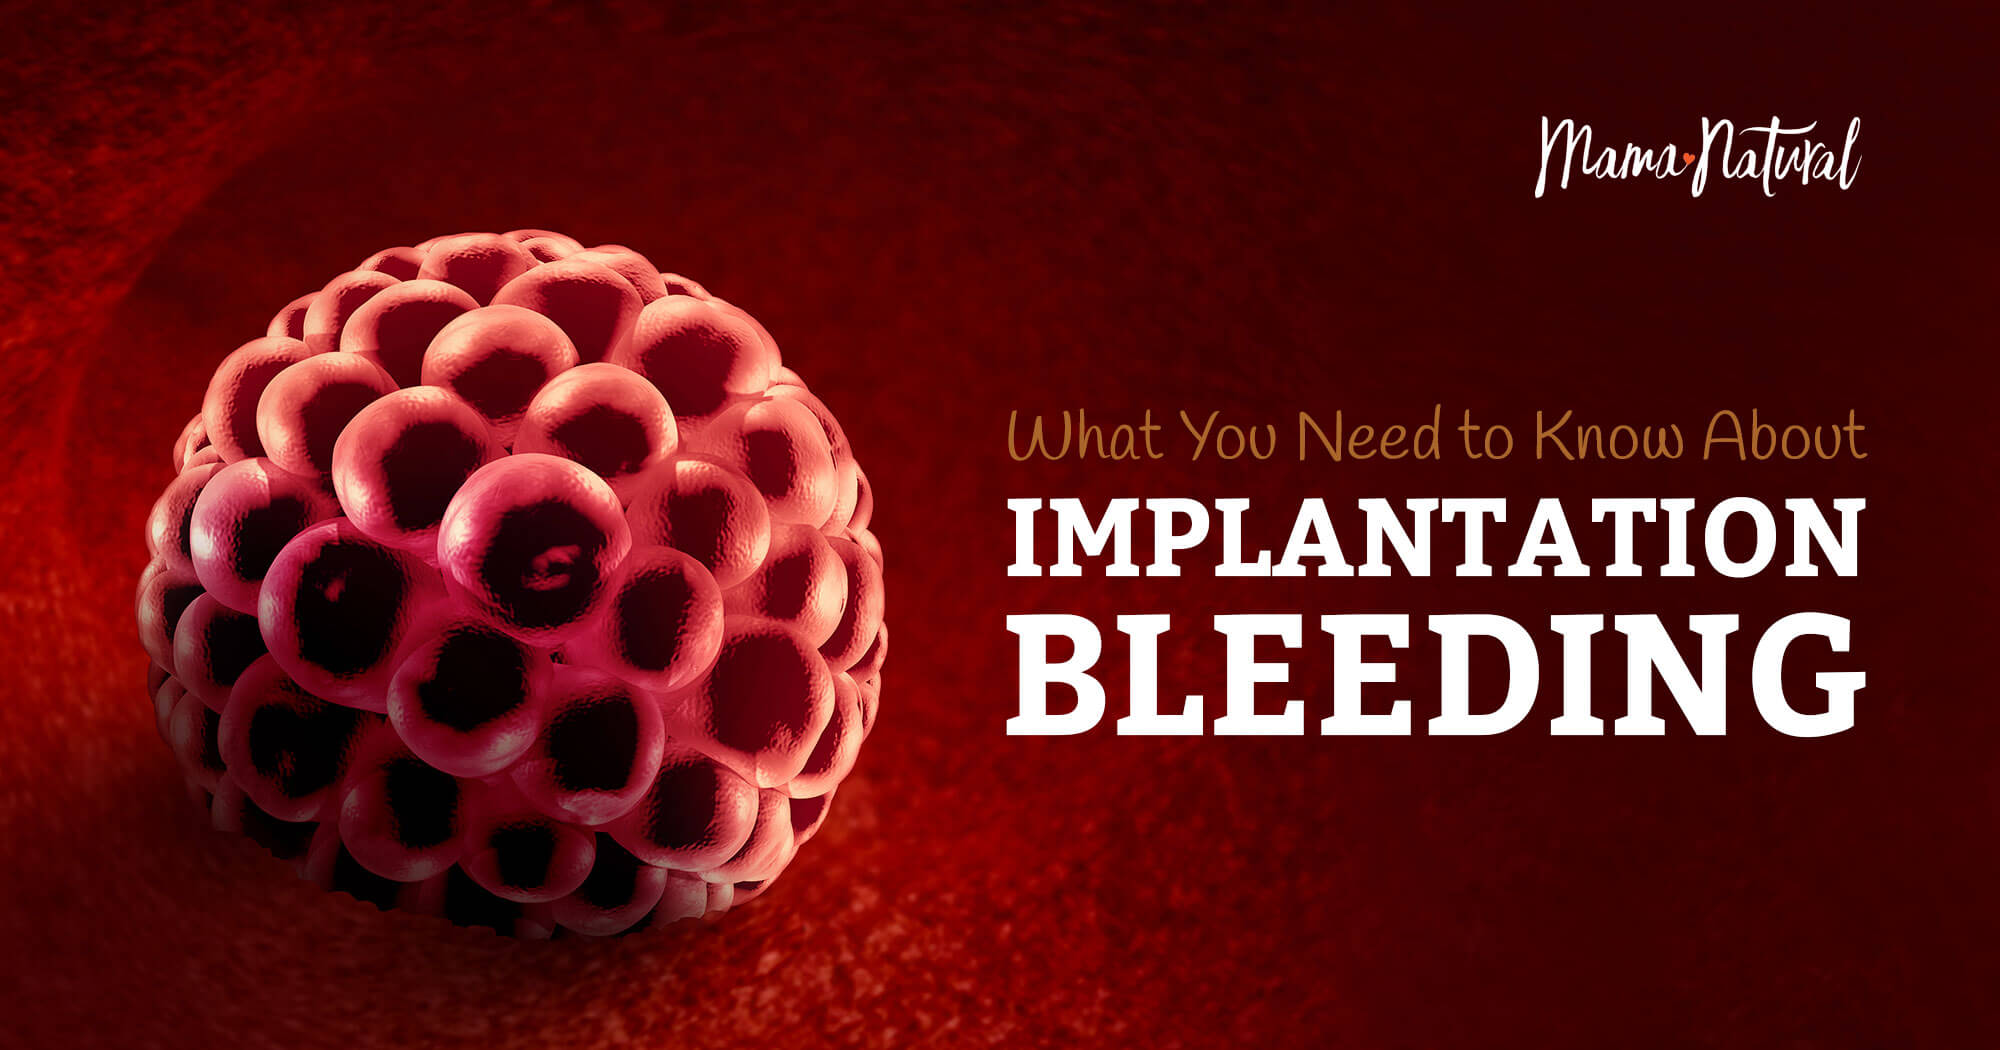 Implantation Bleeding: What It Is and What to Look For (Photos!)